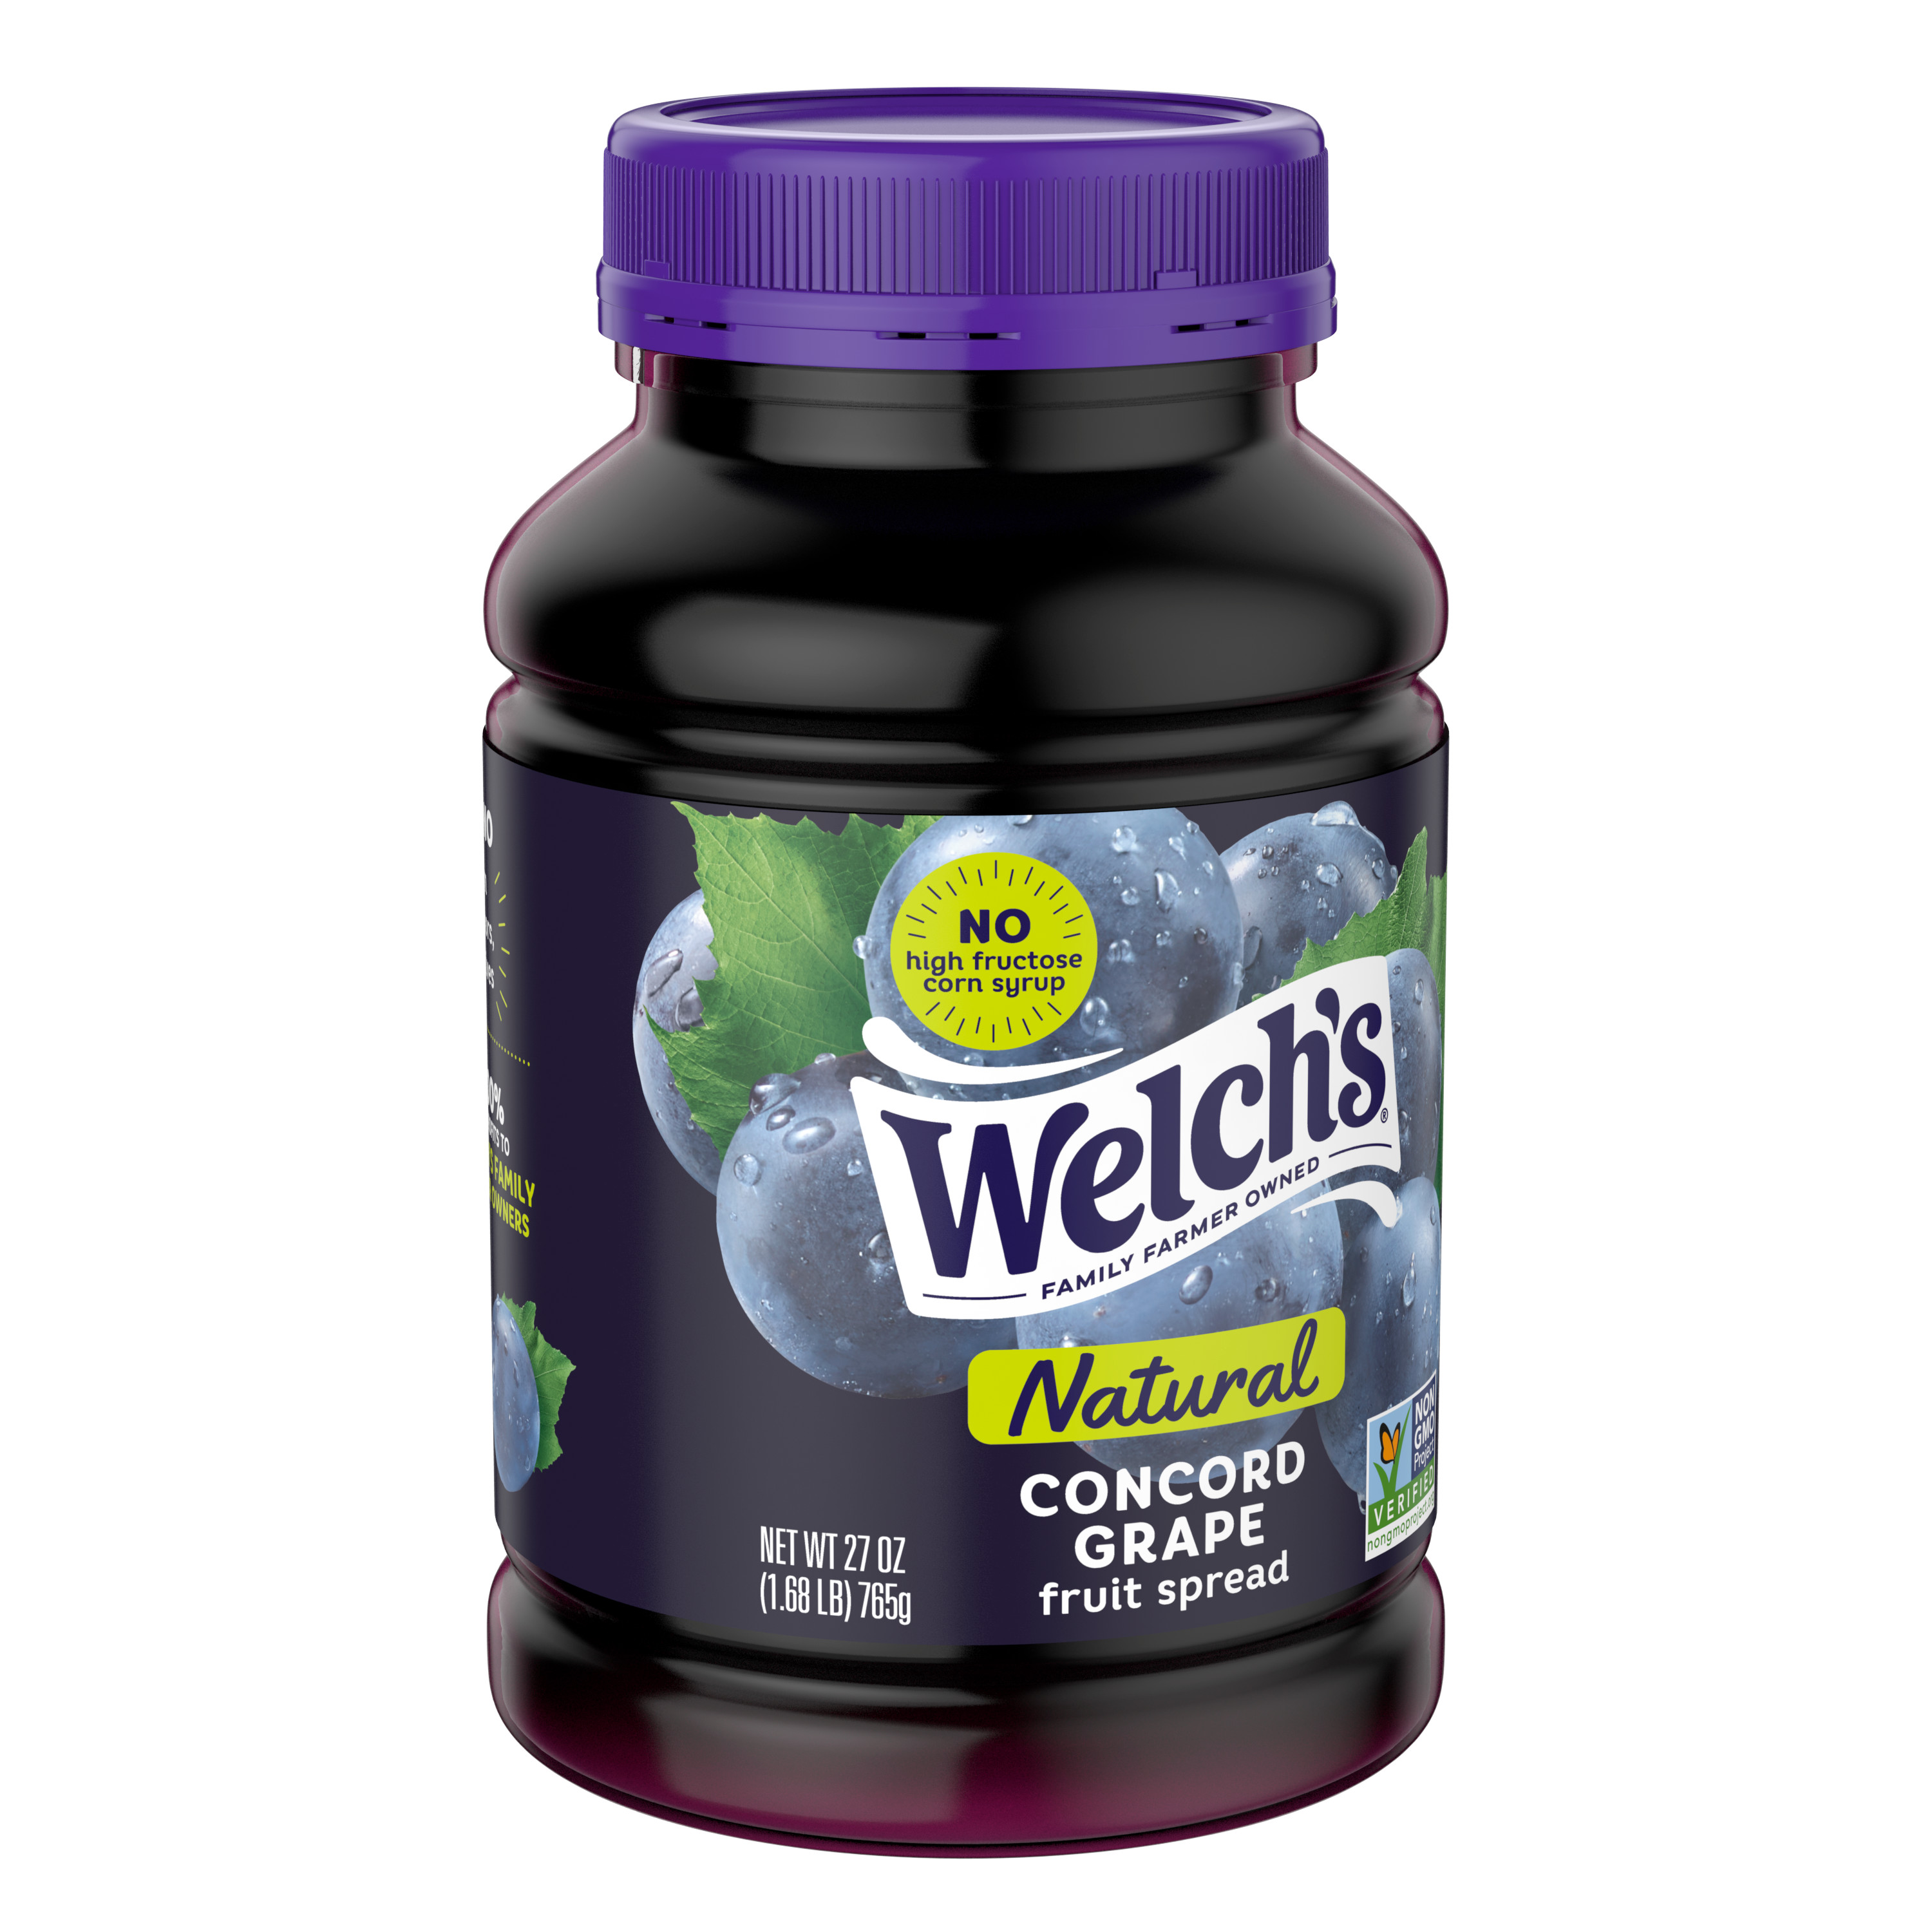 Welch's Natural Concord Grape Spread, 27 oz Jar - image 4 of 9